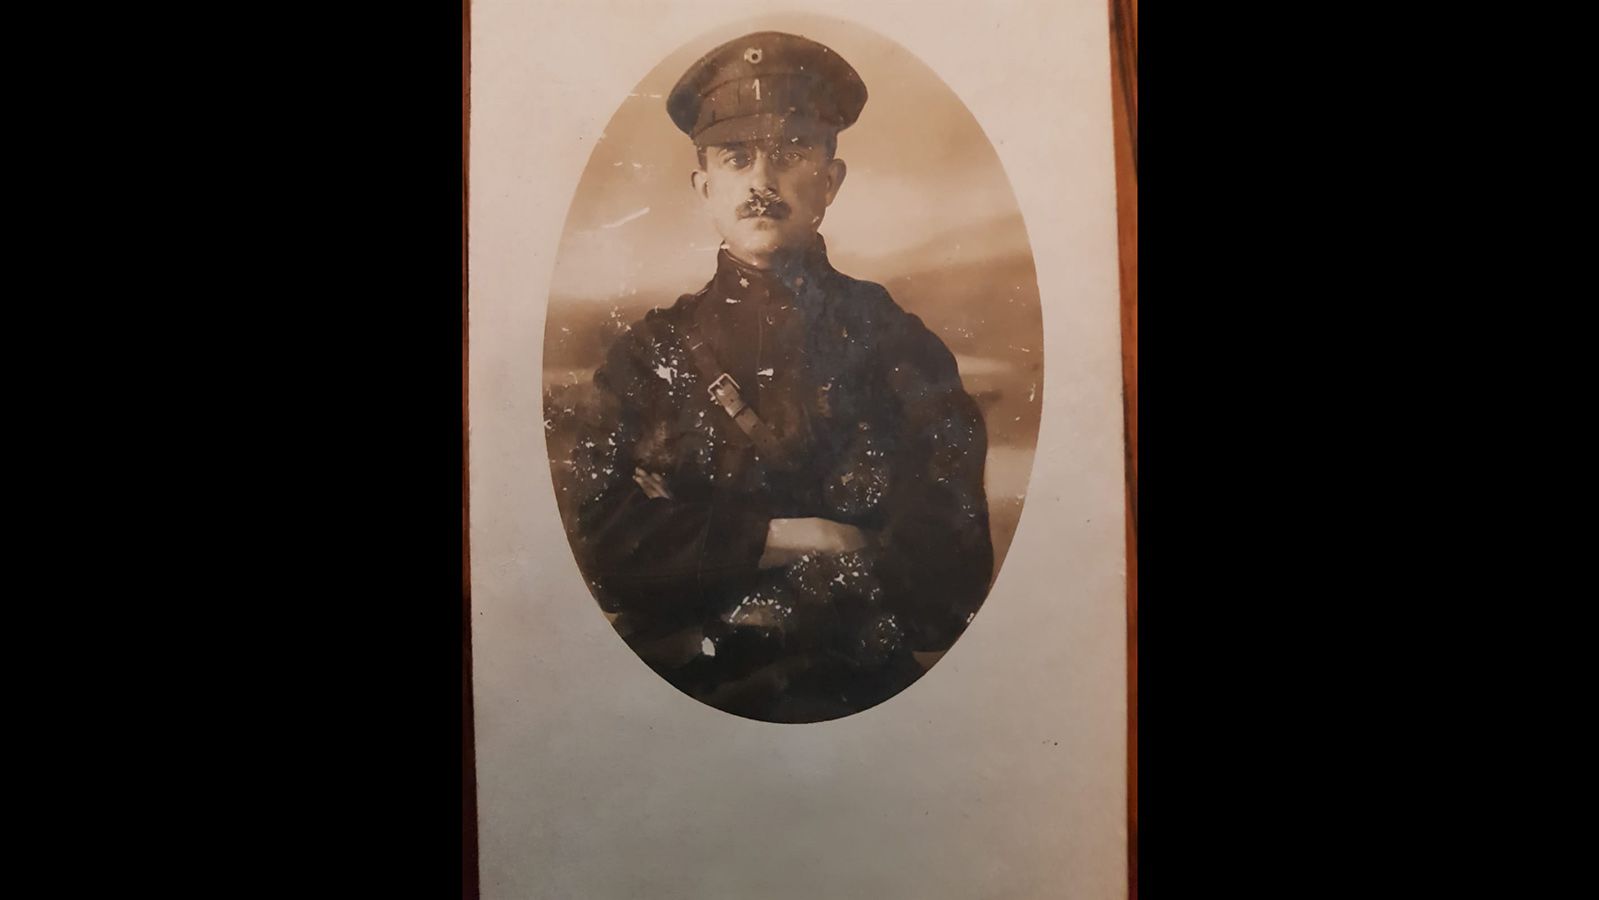 Optatius Buyssens, a WWI soldier.